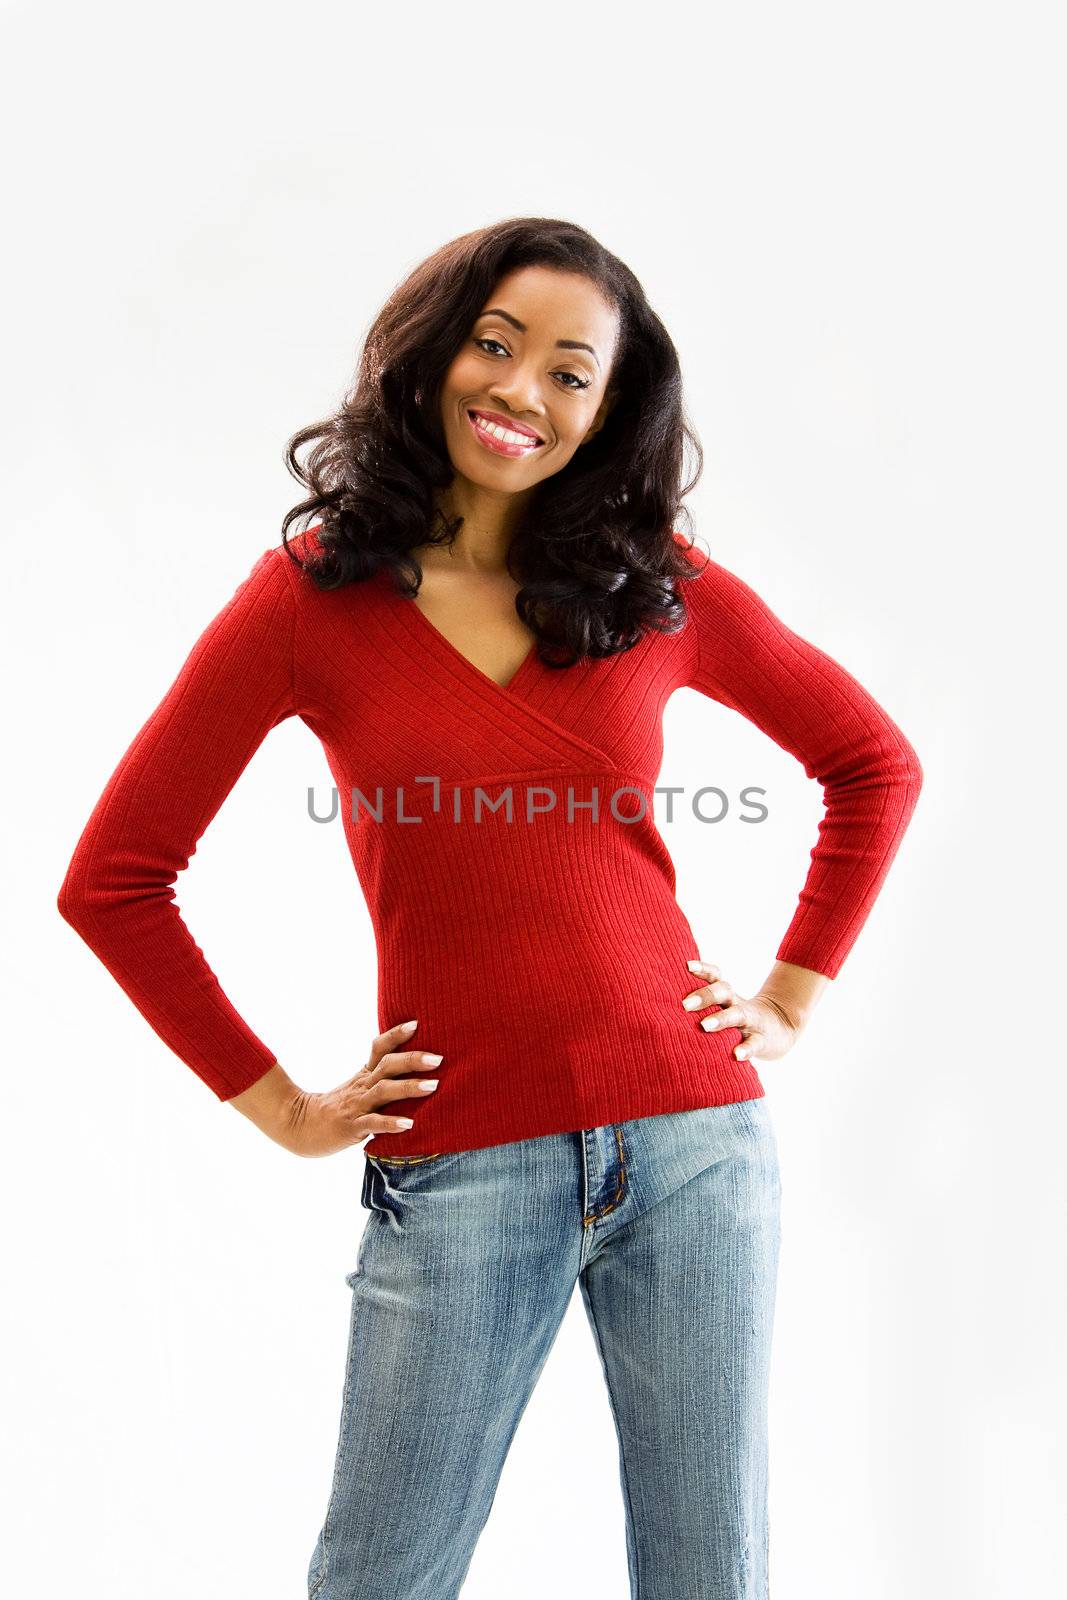 Beautiful African woman standing with hands on hips and smiling, isolated